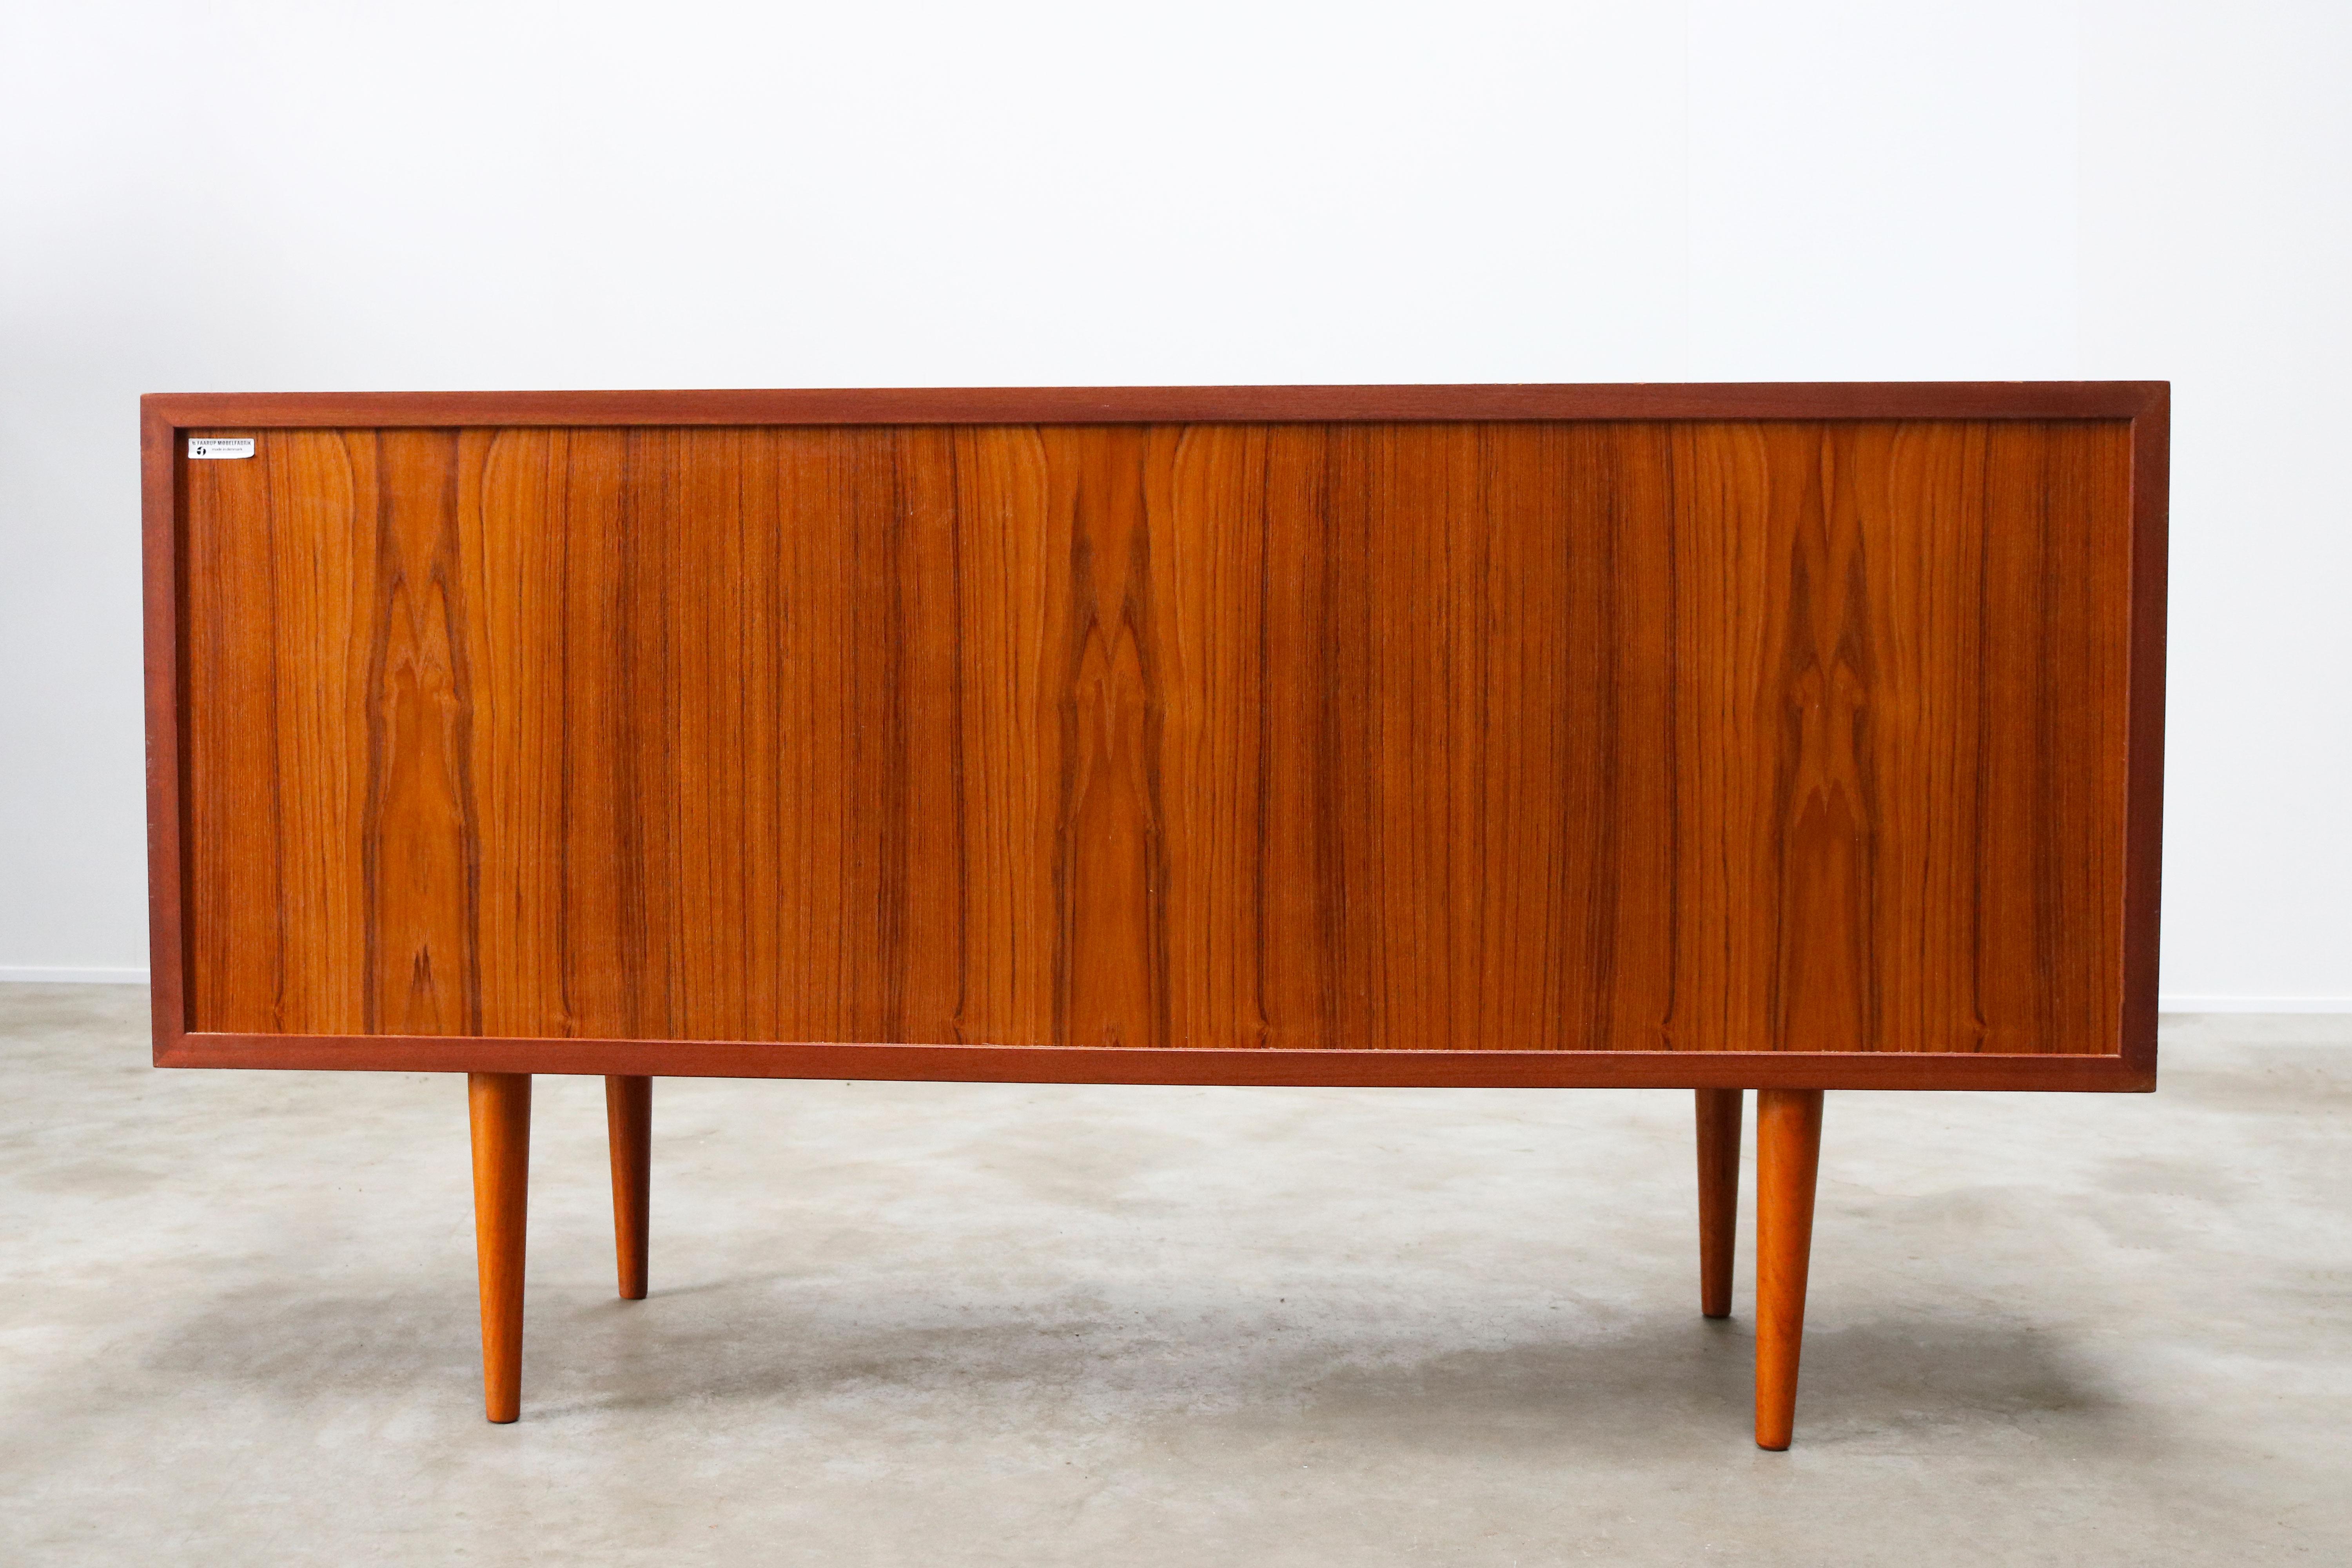 Small Rare Danish Sideboard / Credenza by Svend Aage Madsen for Faarup 1950 Teak 10